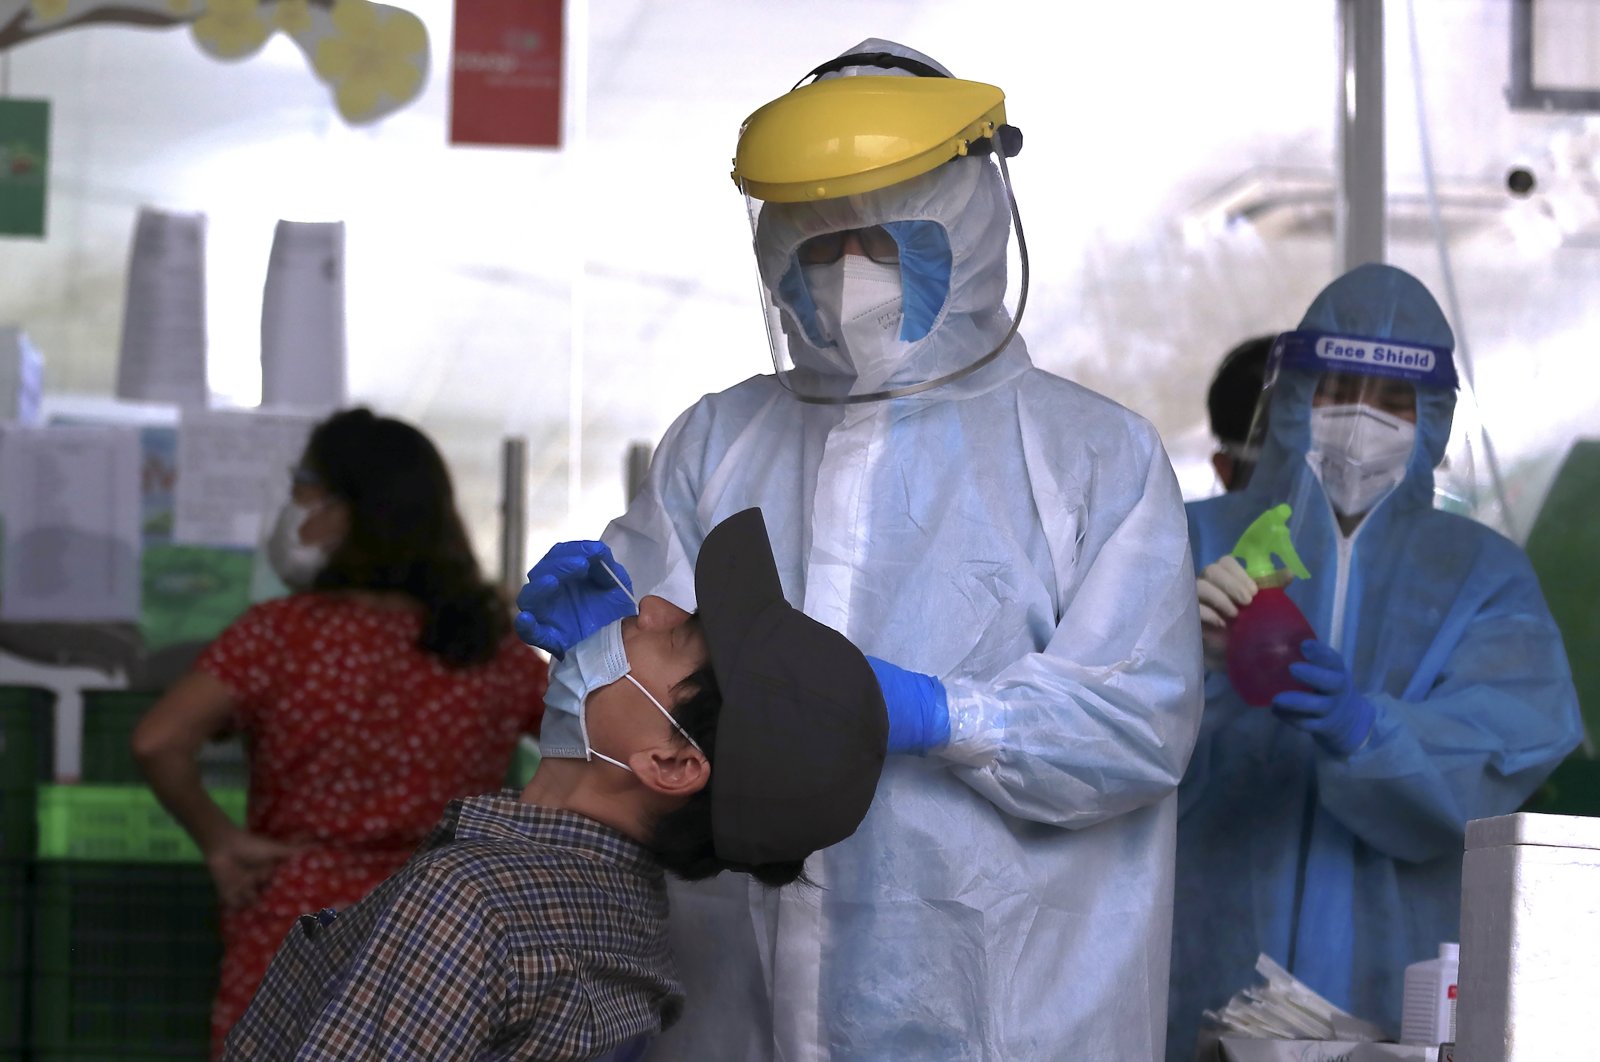 A health worker takes a sample from a man for a COVID-19 test in Hanoi, Vietnam, Jan. 6, 2022. (AP Photo)